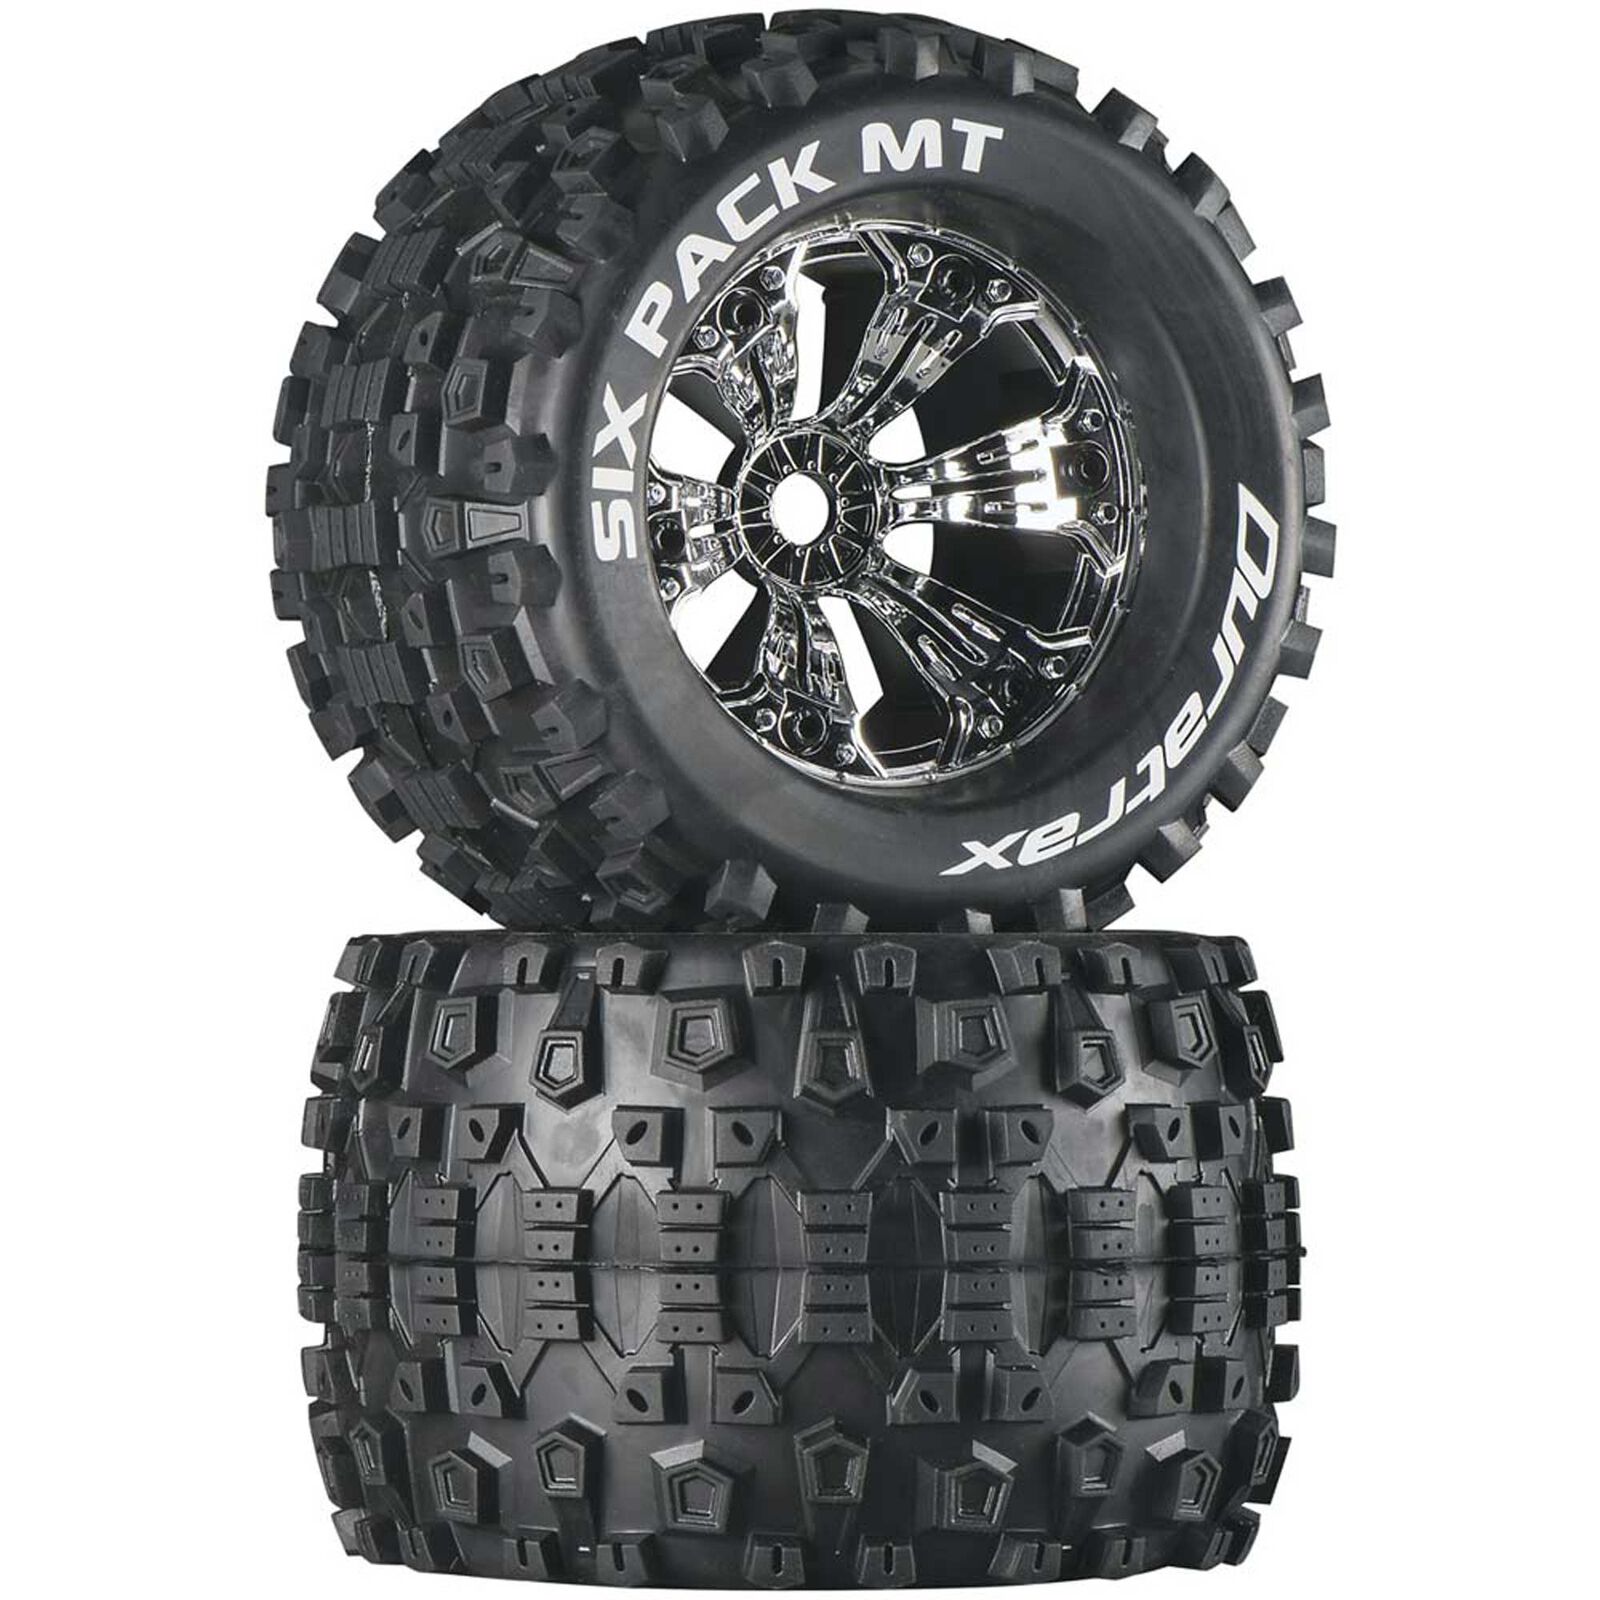 Six-Pack MT 3.8" Mounted 1/2" Offset  Tires, Chrome (2)